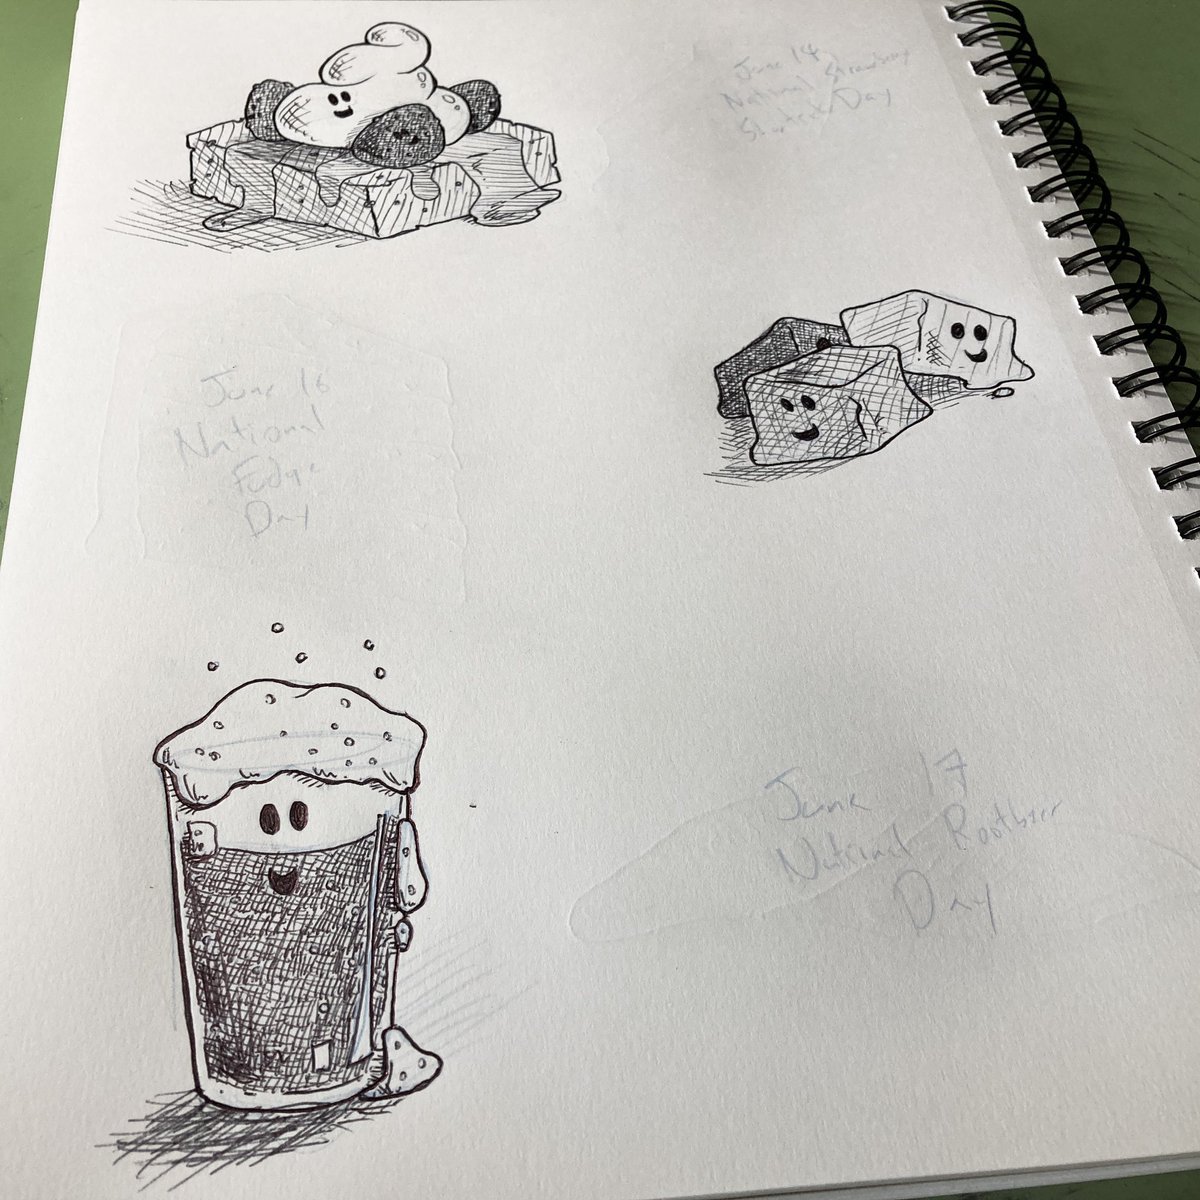 Three more #sketches representing some upcoming #NationalDays for candycritic.org.

#art #drawing